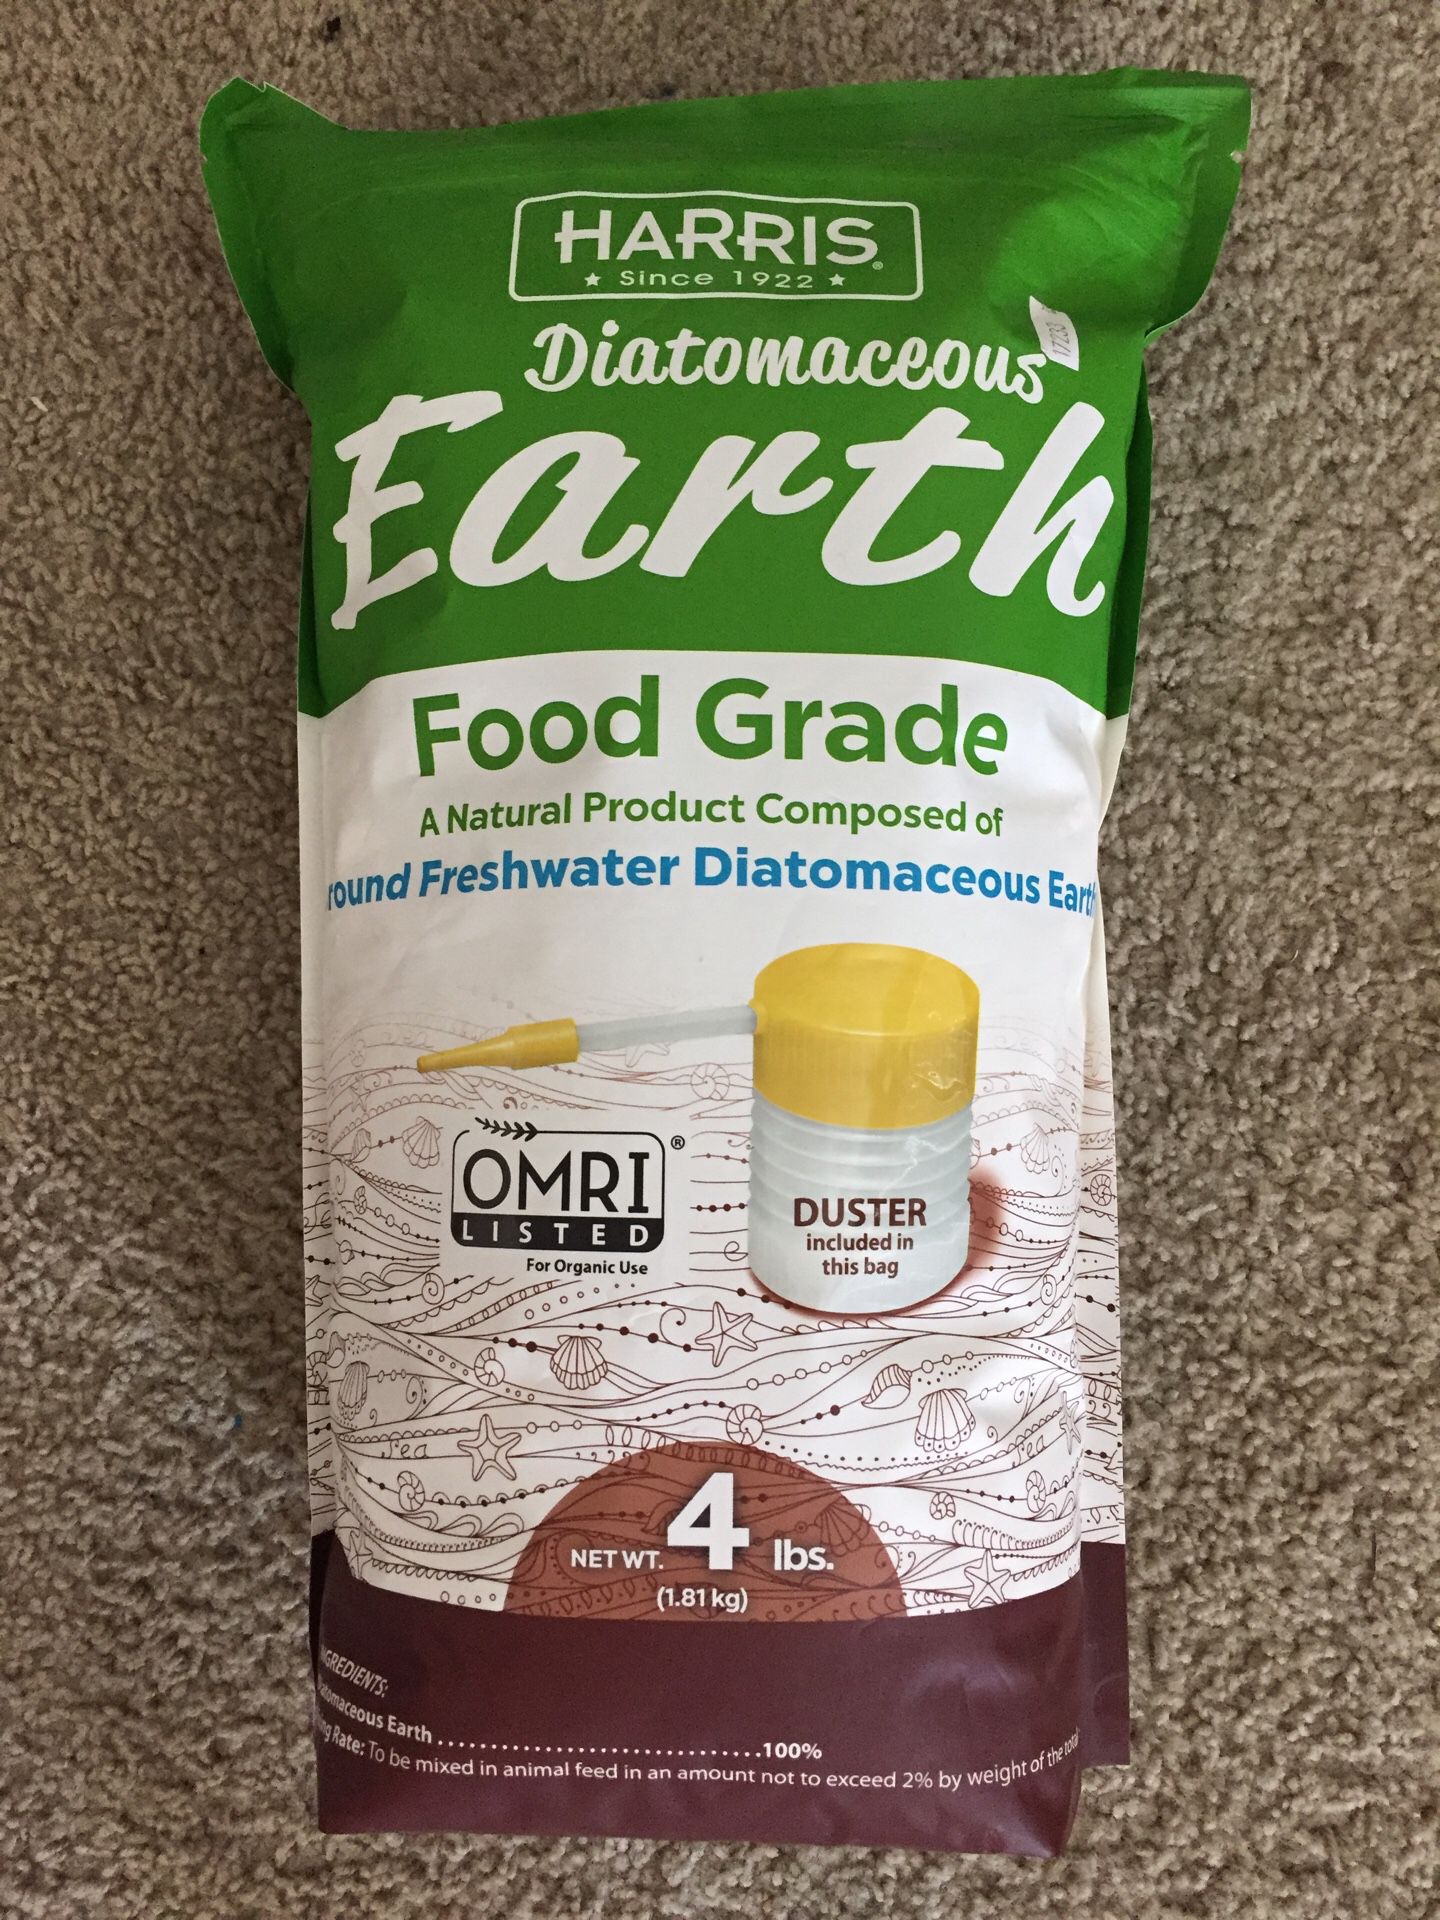 Food grade for earth